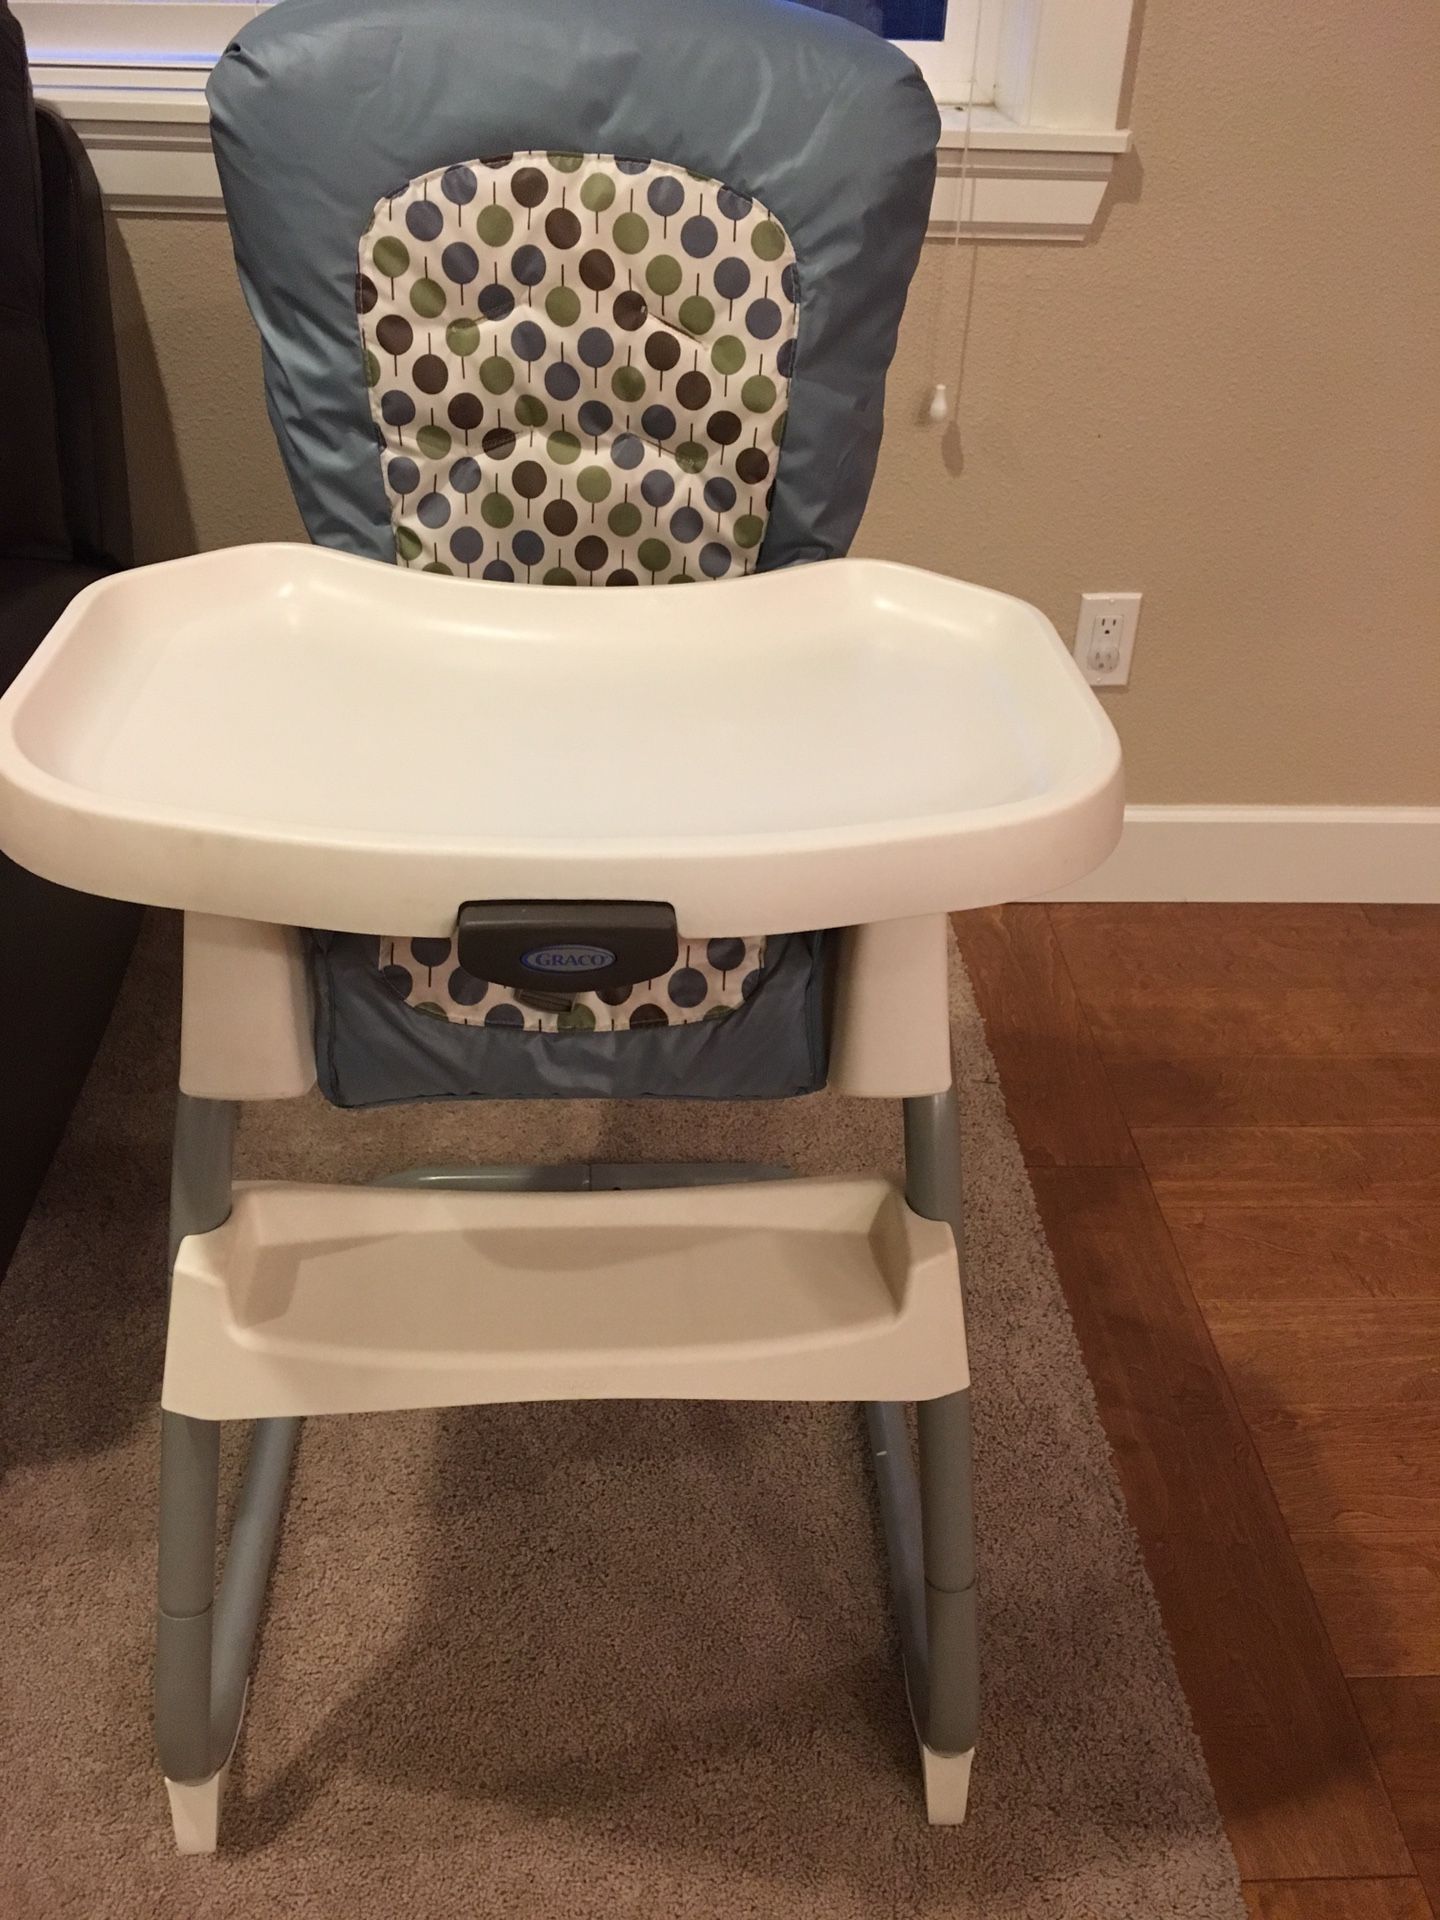 Graco high chair - converts to booster seat